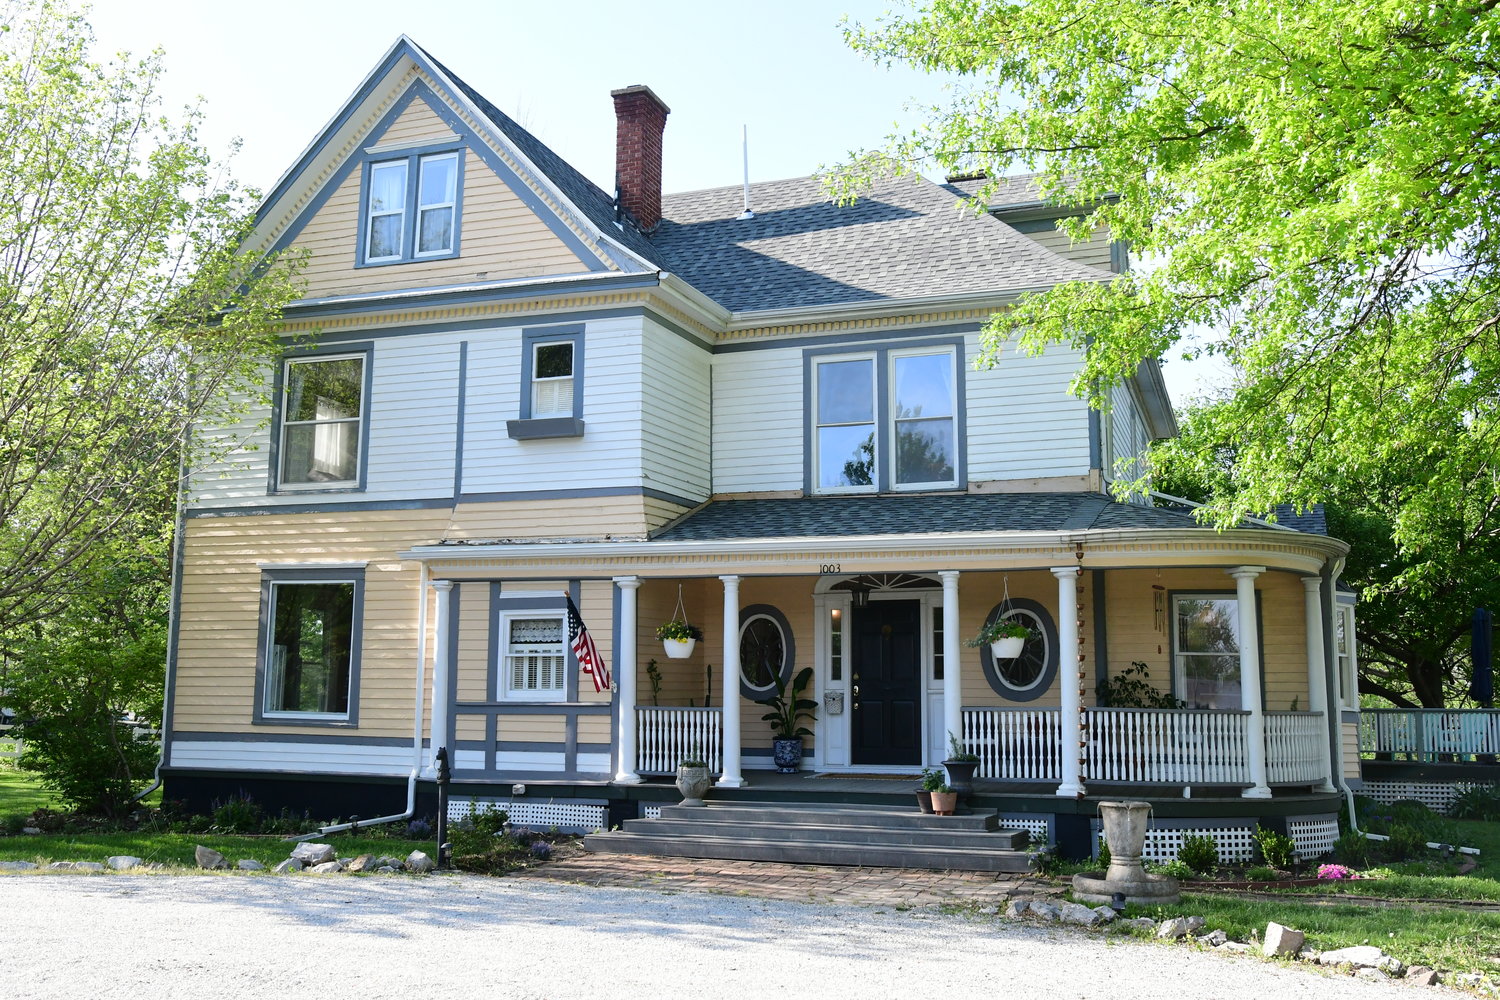 The Evans House, located in Kirksville at 1003 E. Illinois Street. It is the 12th historic landmark in the city.